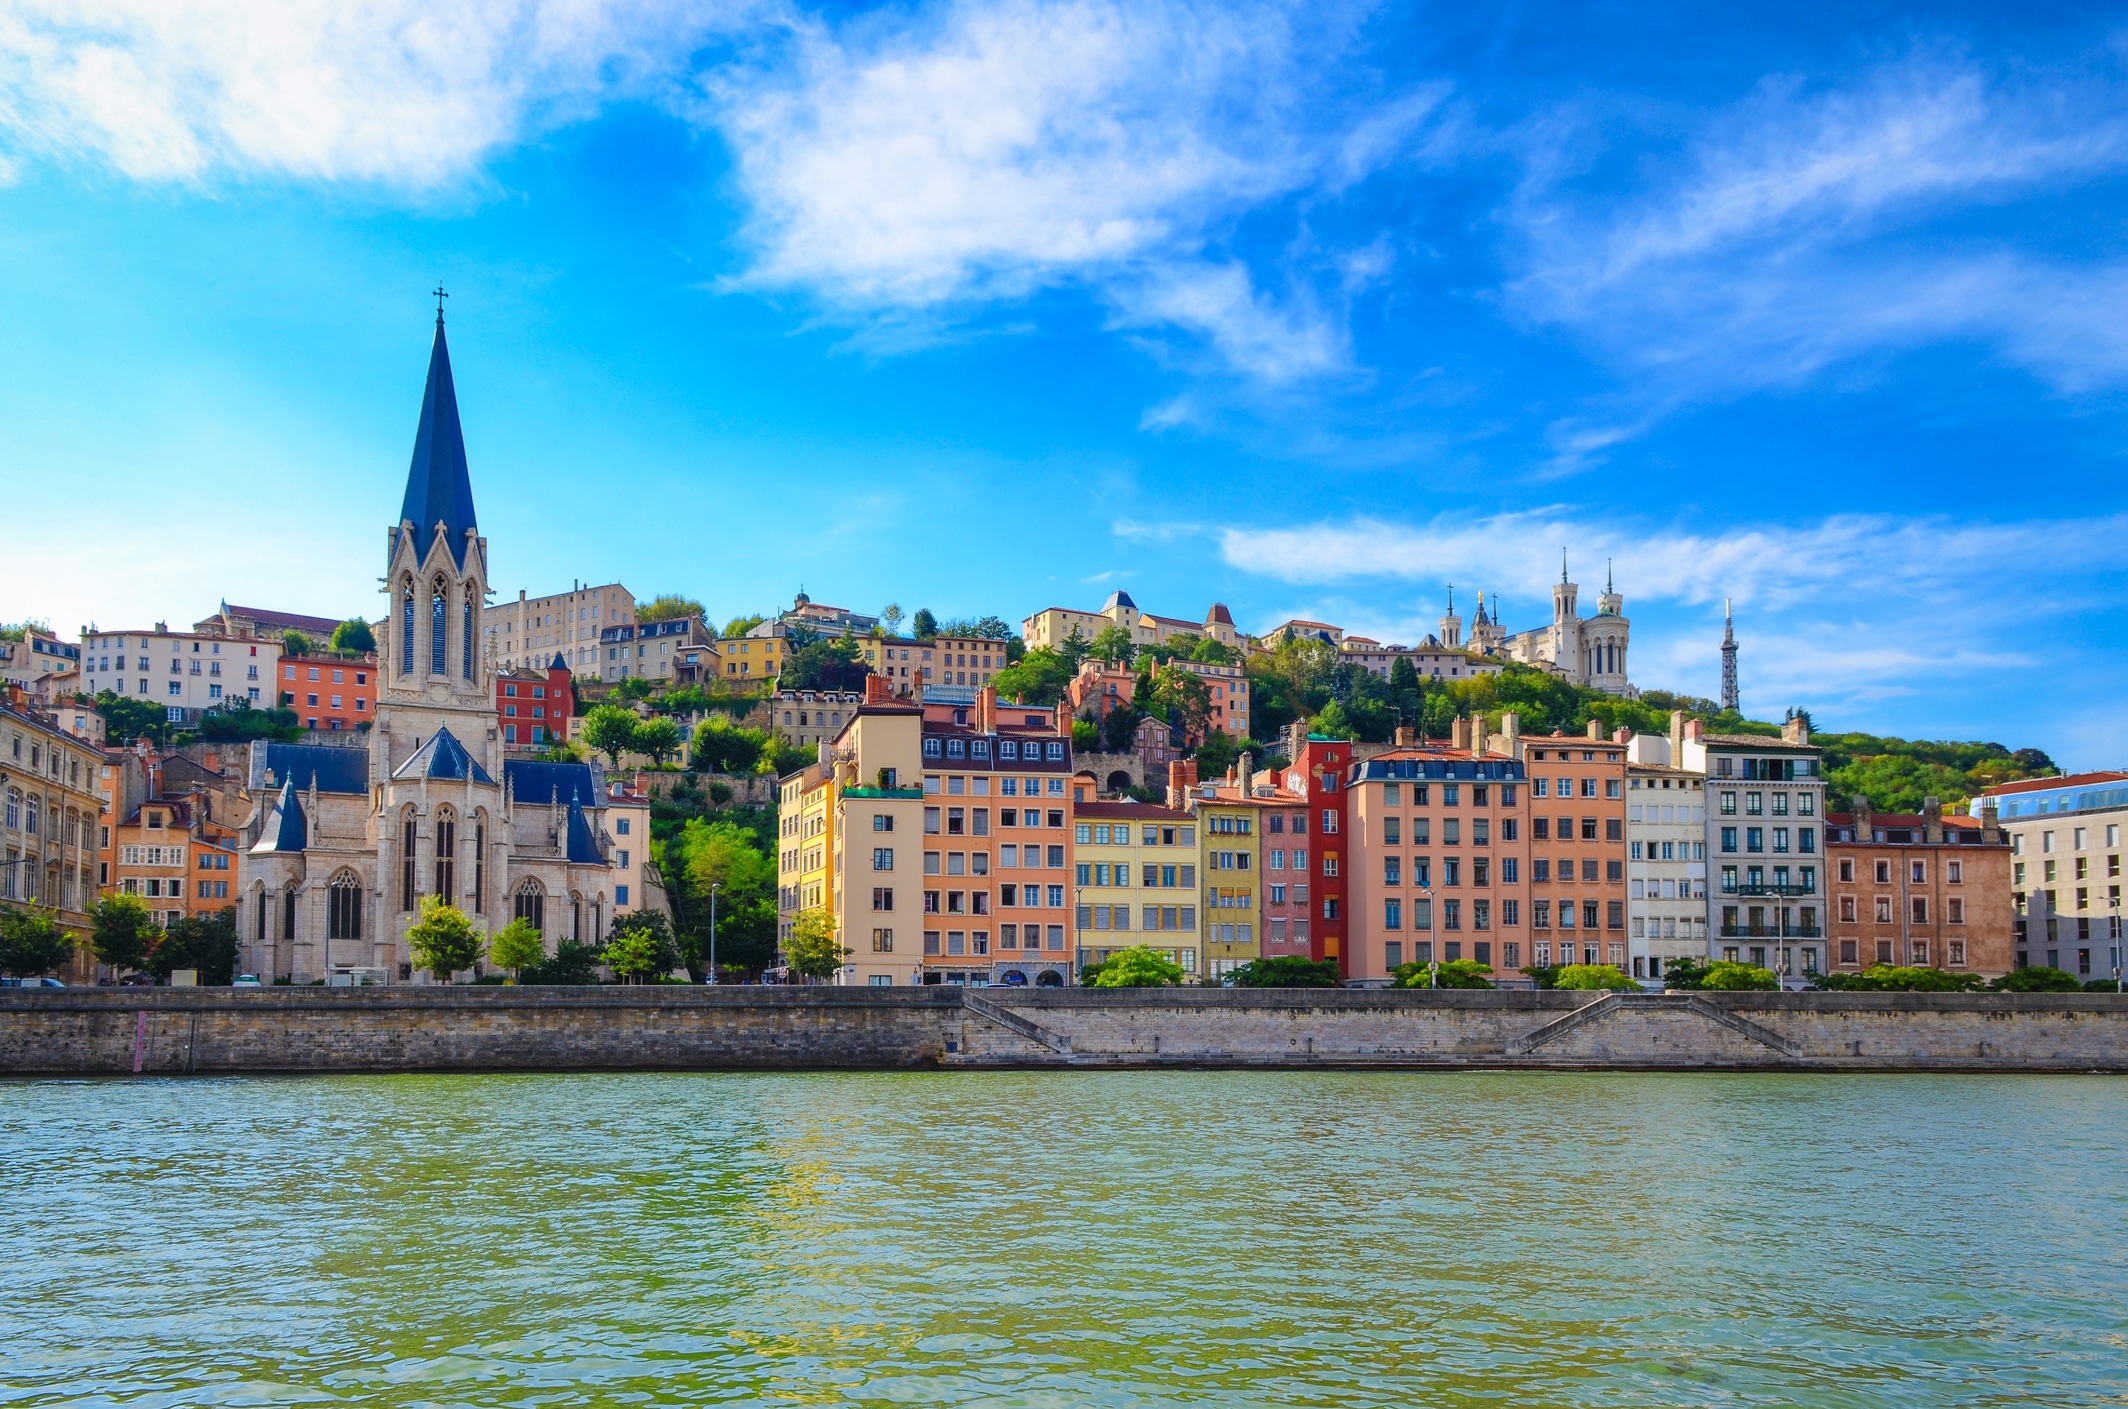 Lyon cityscape from Saone river with colorful houses